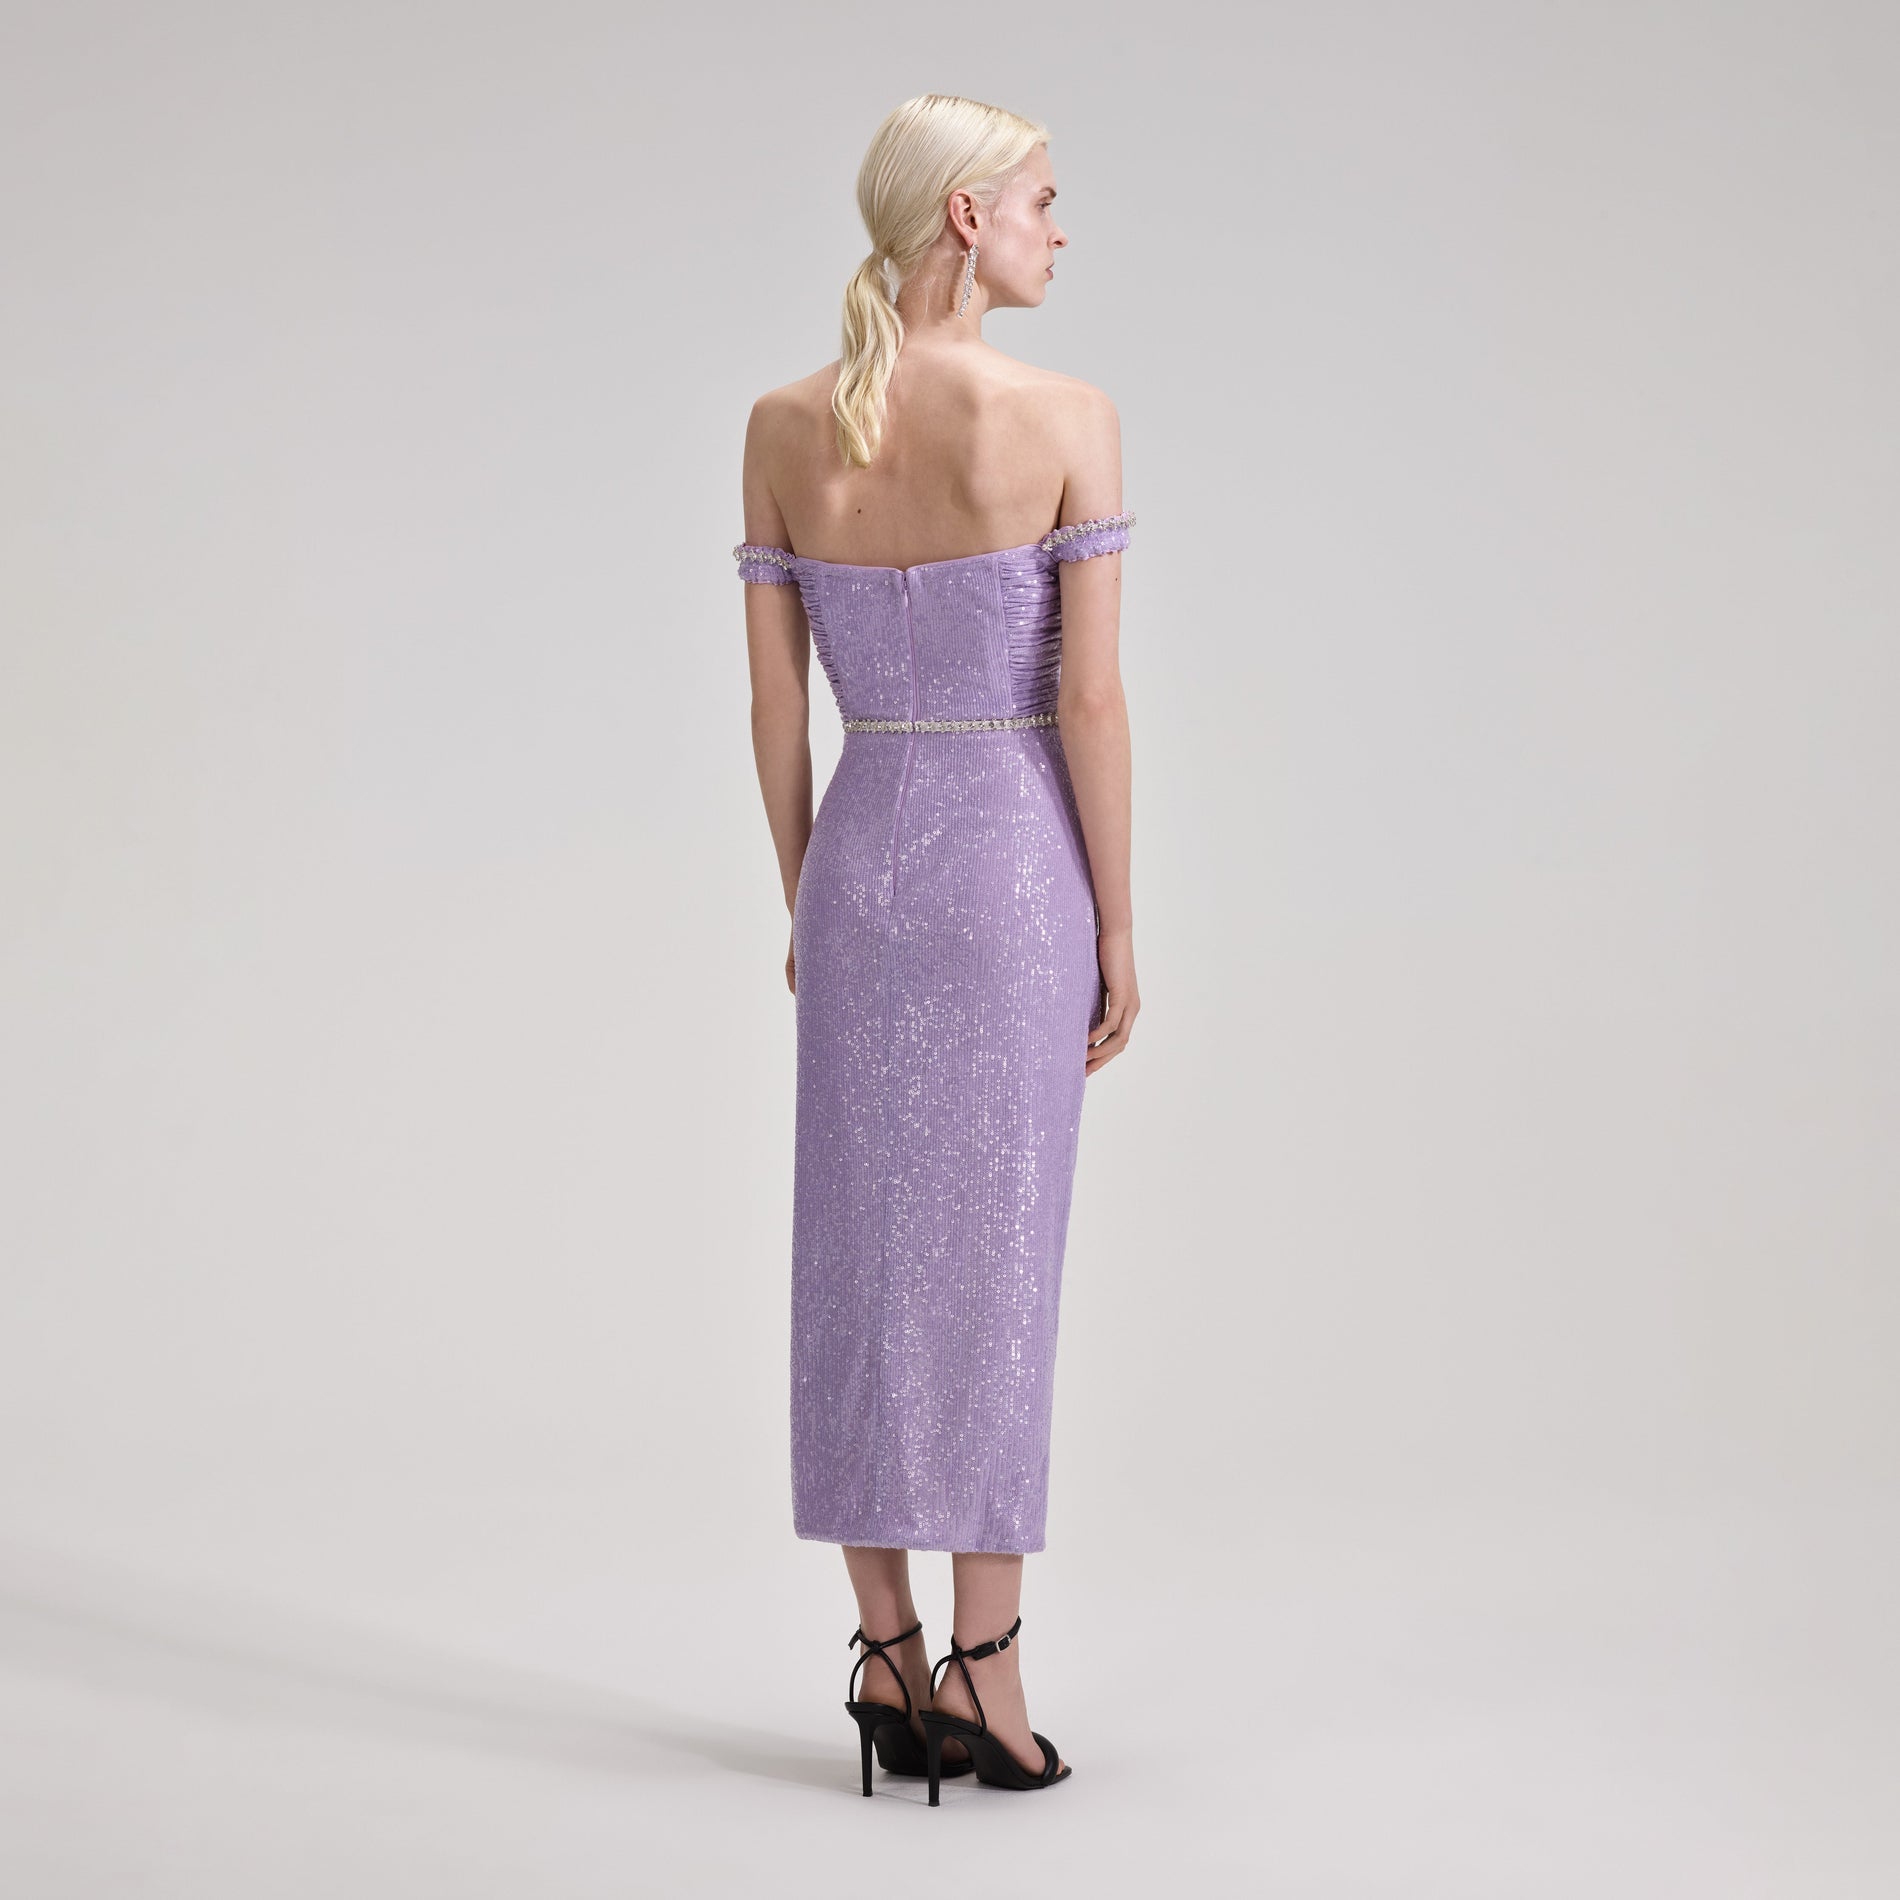 A woman wearing the Lilac Sequin Midi Dress